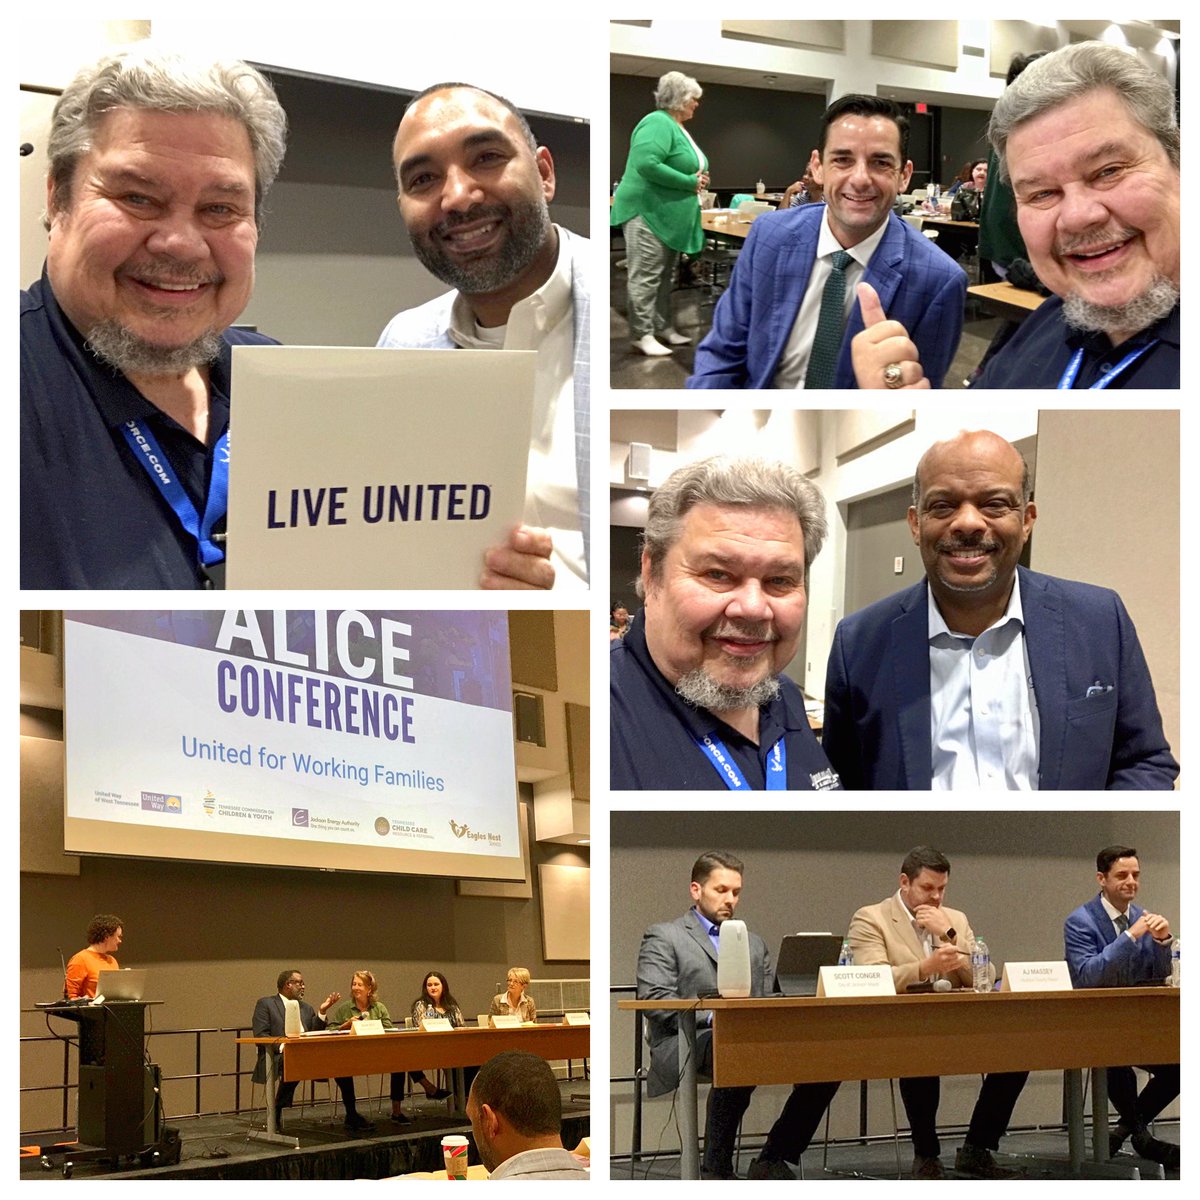 What an informative and inspiring event today at the ALICE Conference sponsored by @LiveUnitedTN Covered everything from affordable housing to childcare and early childhood literacy @TN_Literacy @MayorConger @ajthemayor @jakewcmayor Many distinguished speakers! #liveunited